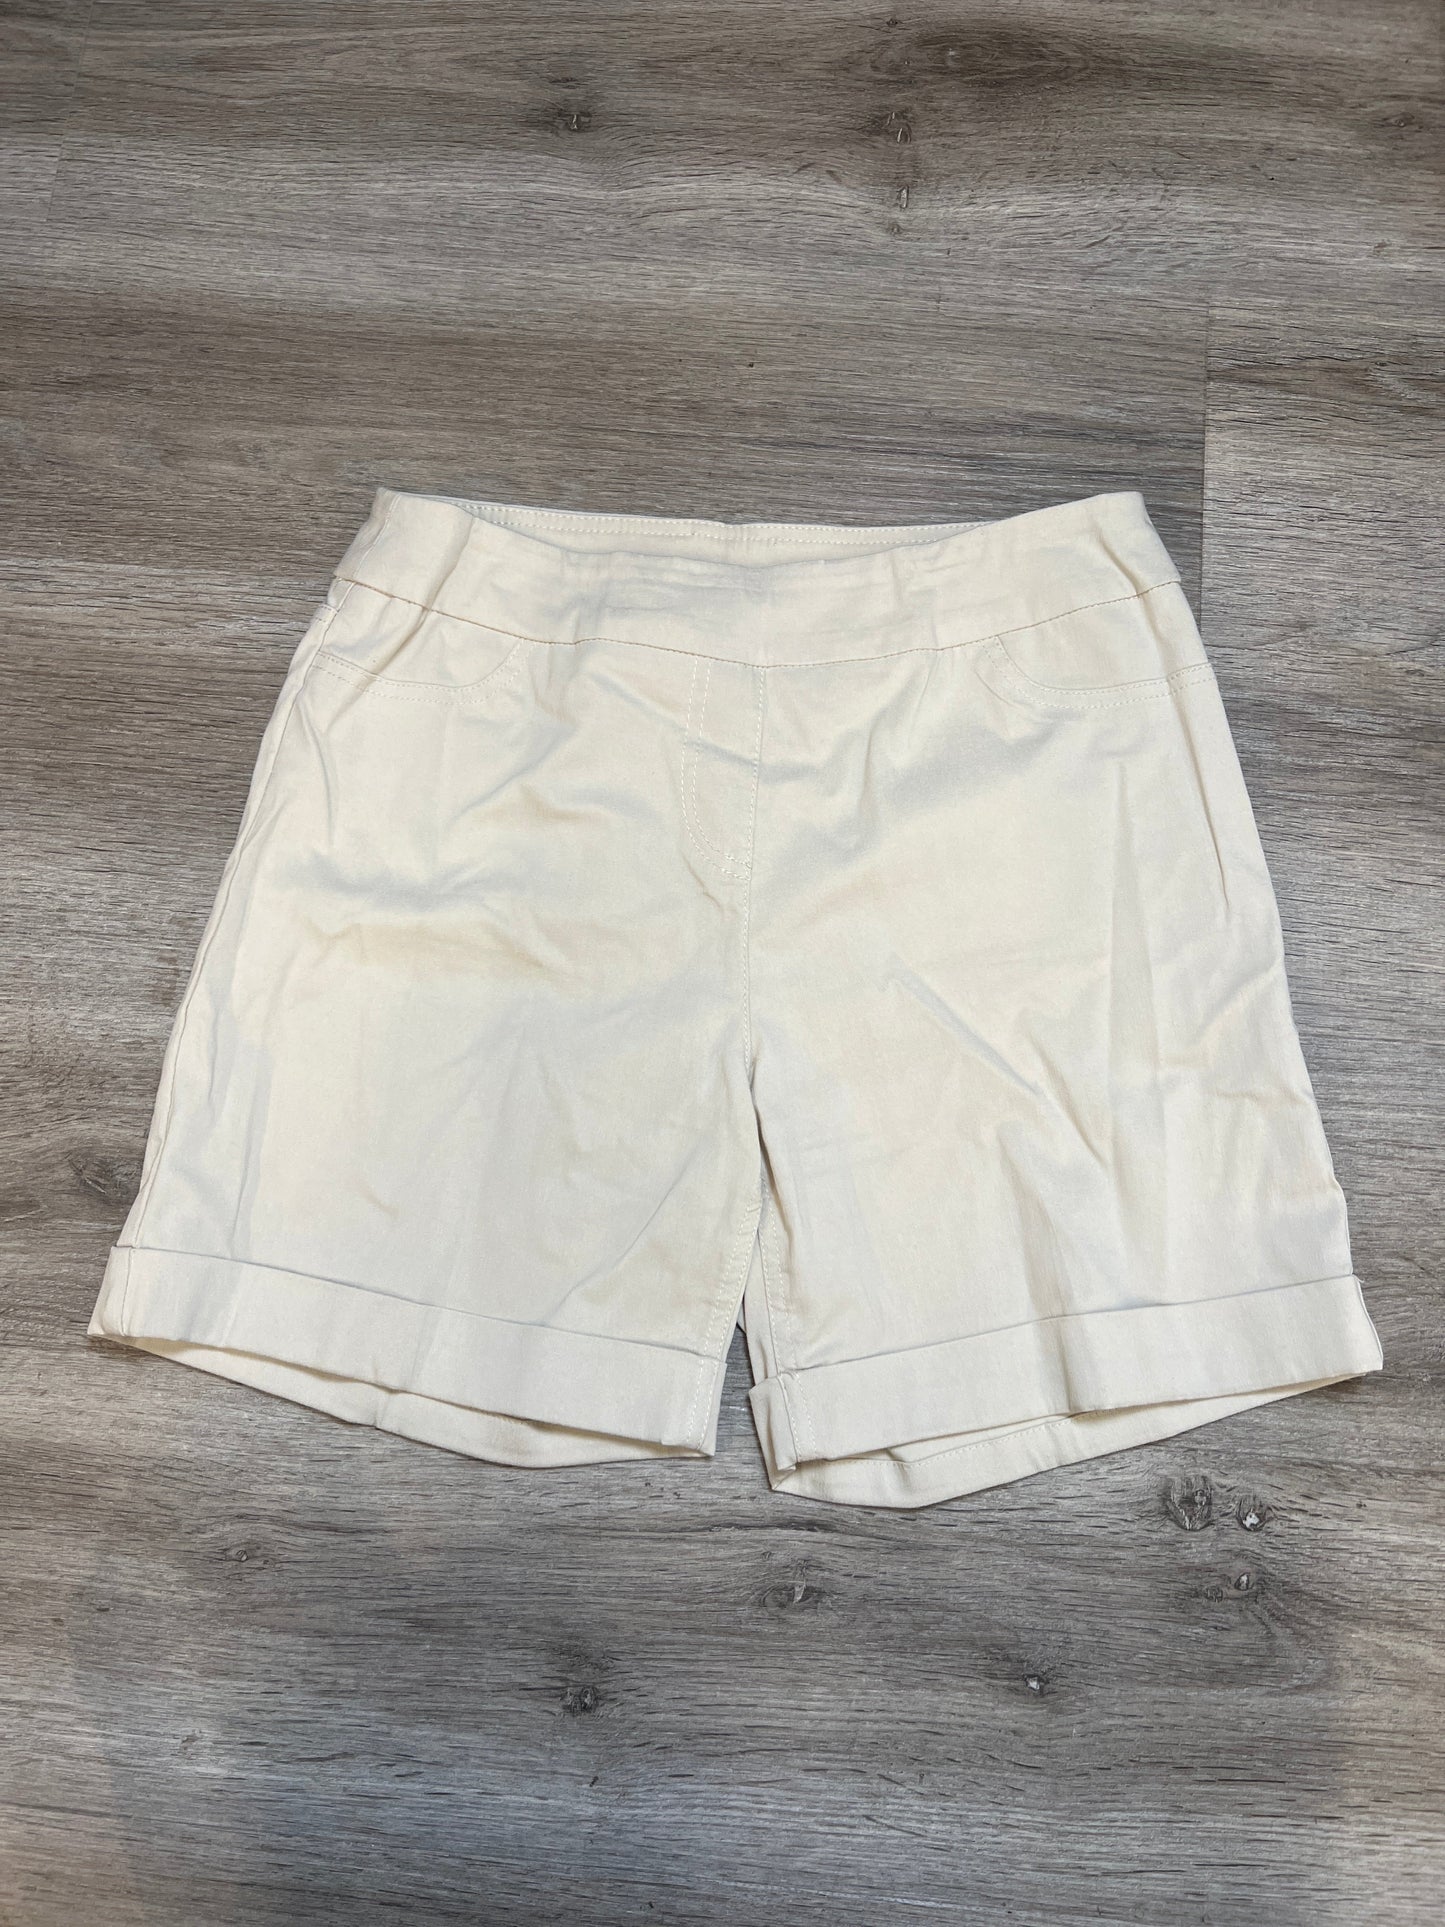 Shorts By Soft Surroundings  Size: S